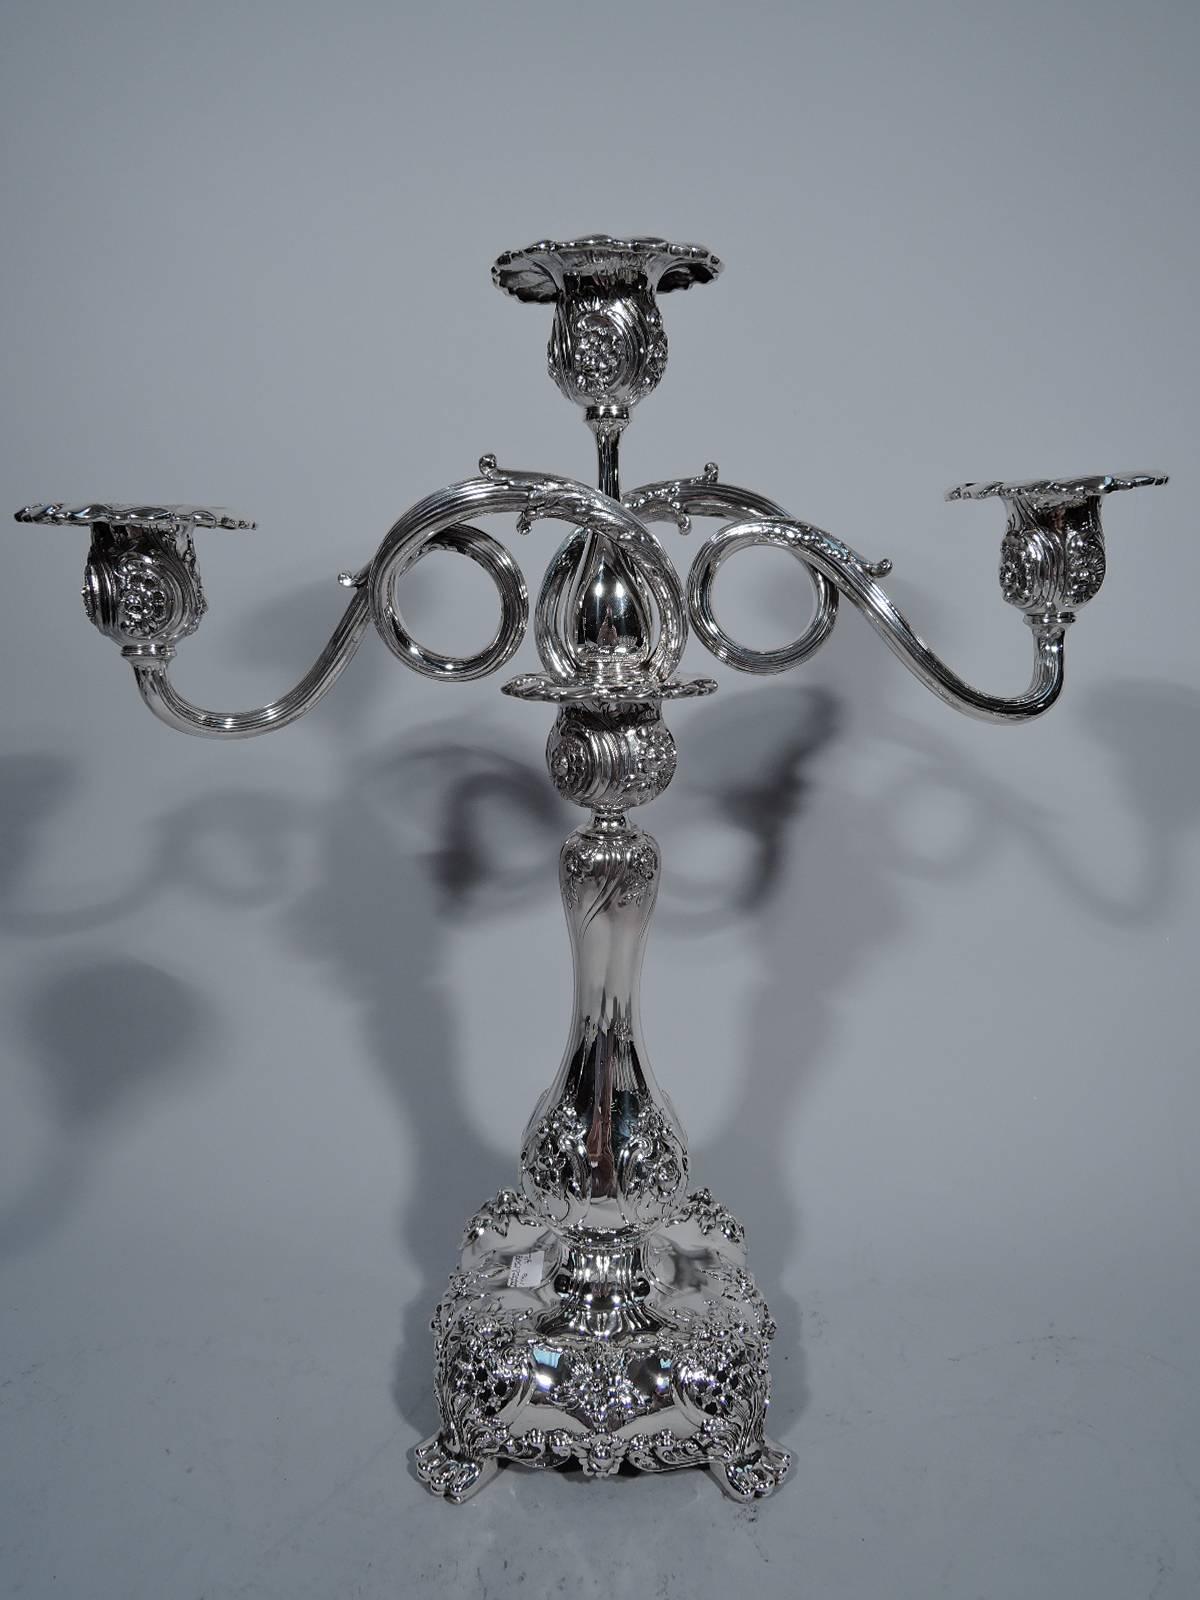 Pair of sterling silver three-light candelabra. Made by Tiffany & Co. in New York. Each: baluster shaft on squarish base with corner paw supports. Central light on baluster with wraparound and looping arms, each terminating in single light. Each arm